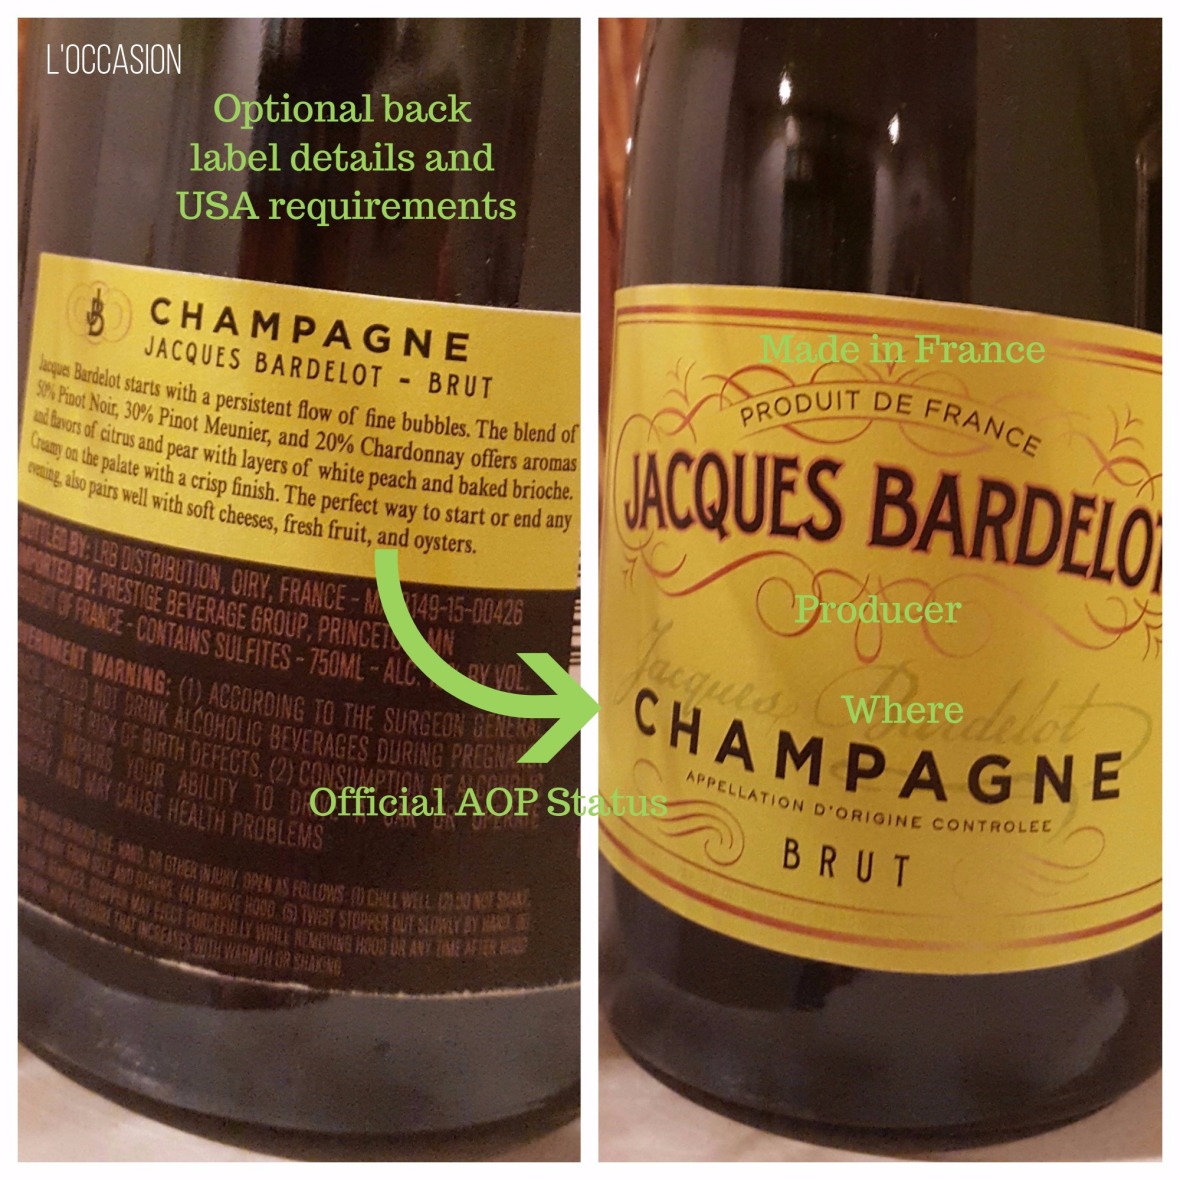 How to read a wine label, how to read a French wine label, where is Champagne, What is Champagne